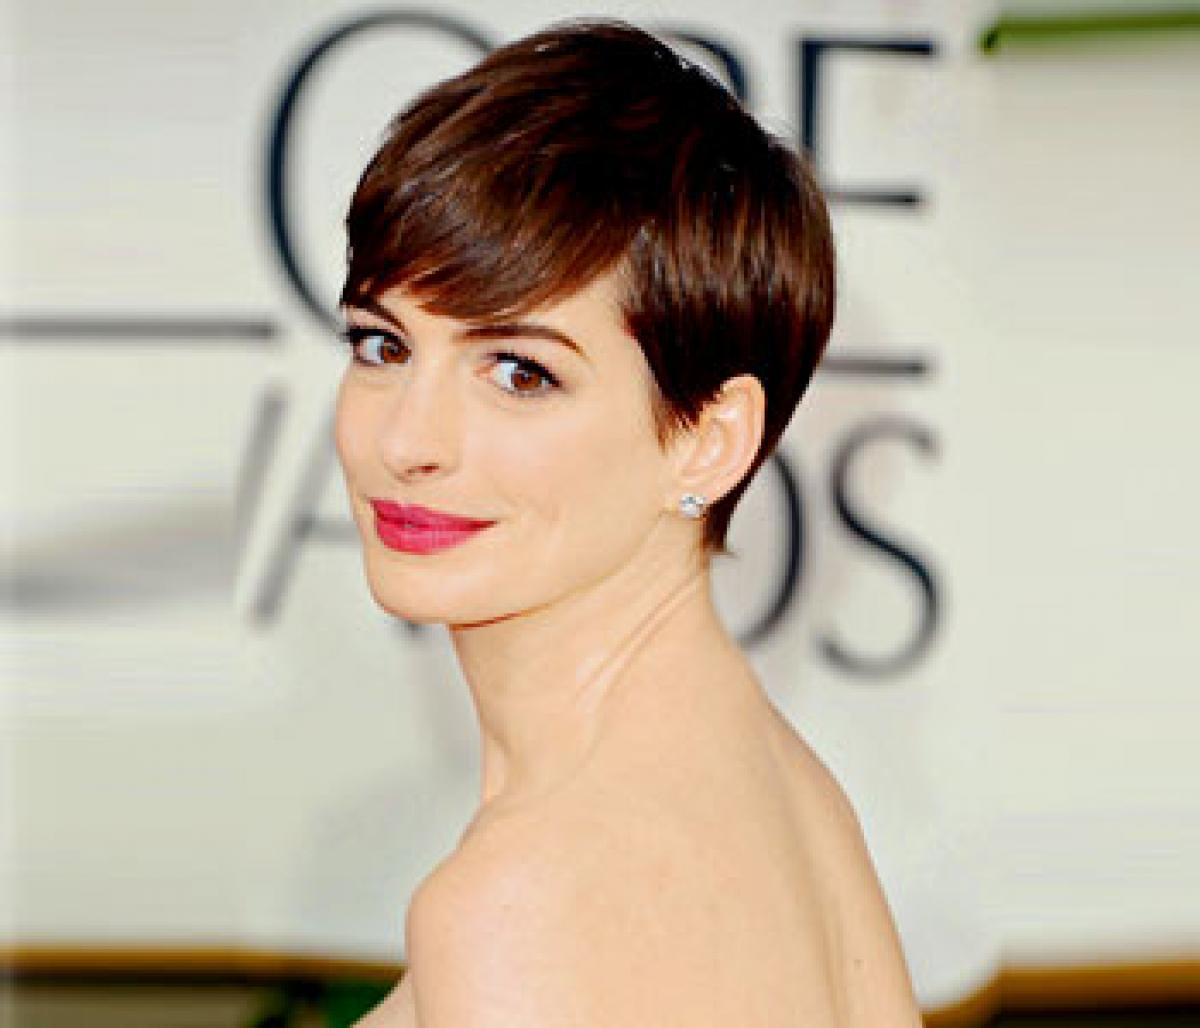 Anne Hathaway reportedly pregnant with first child